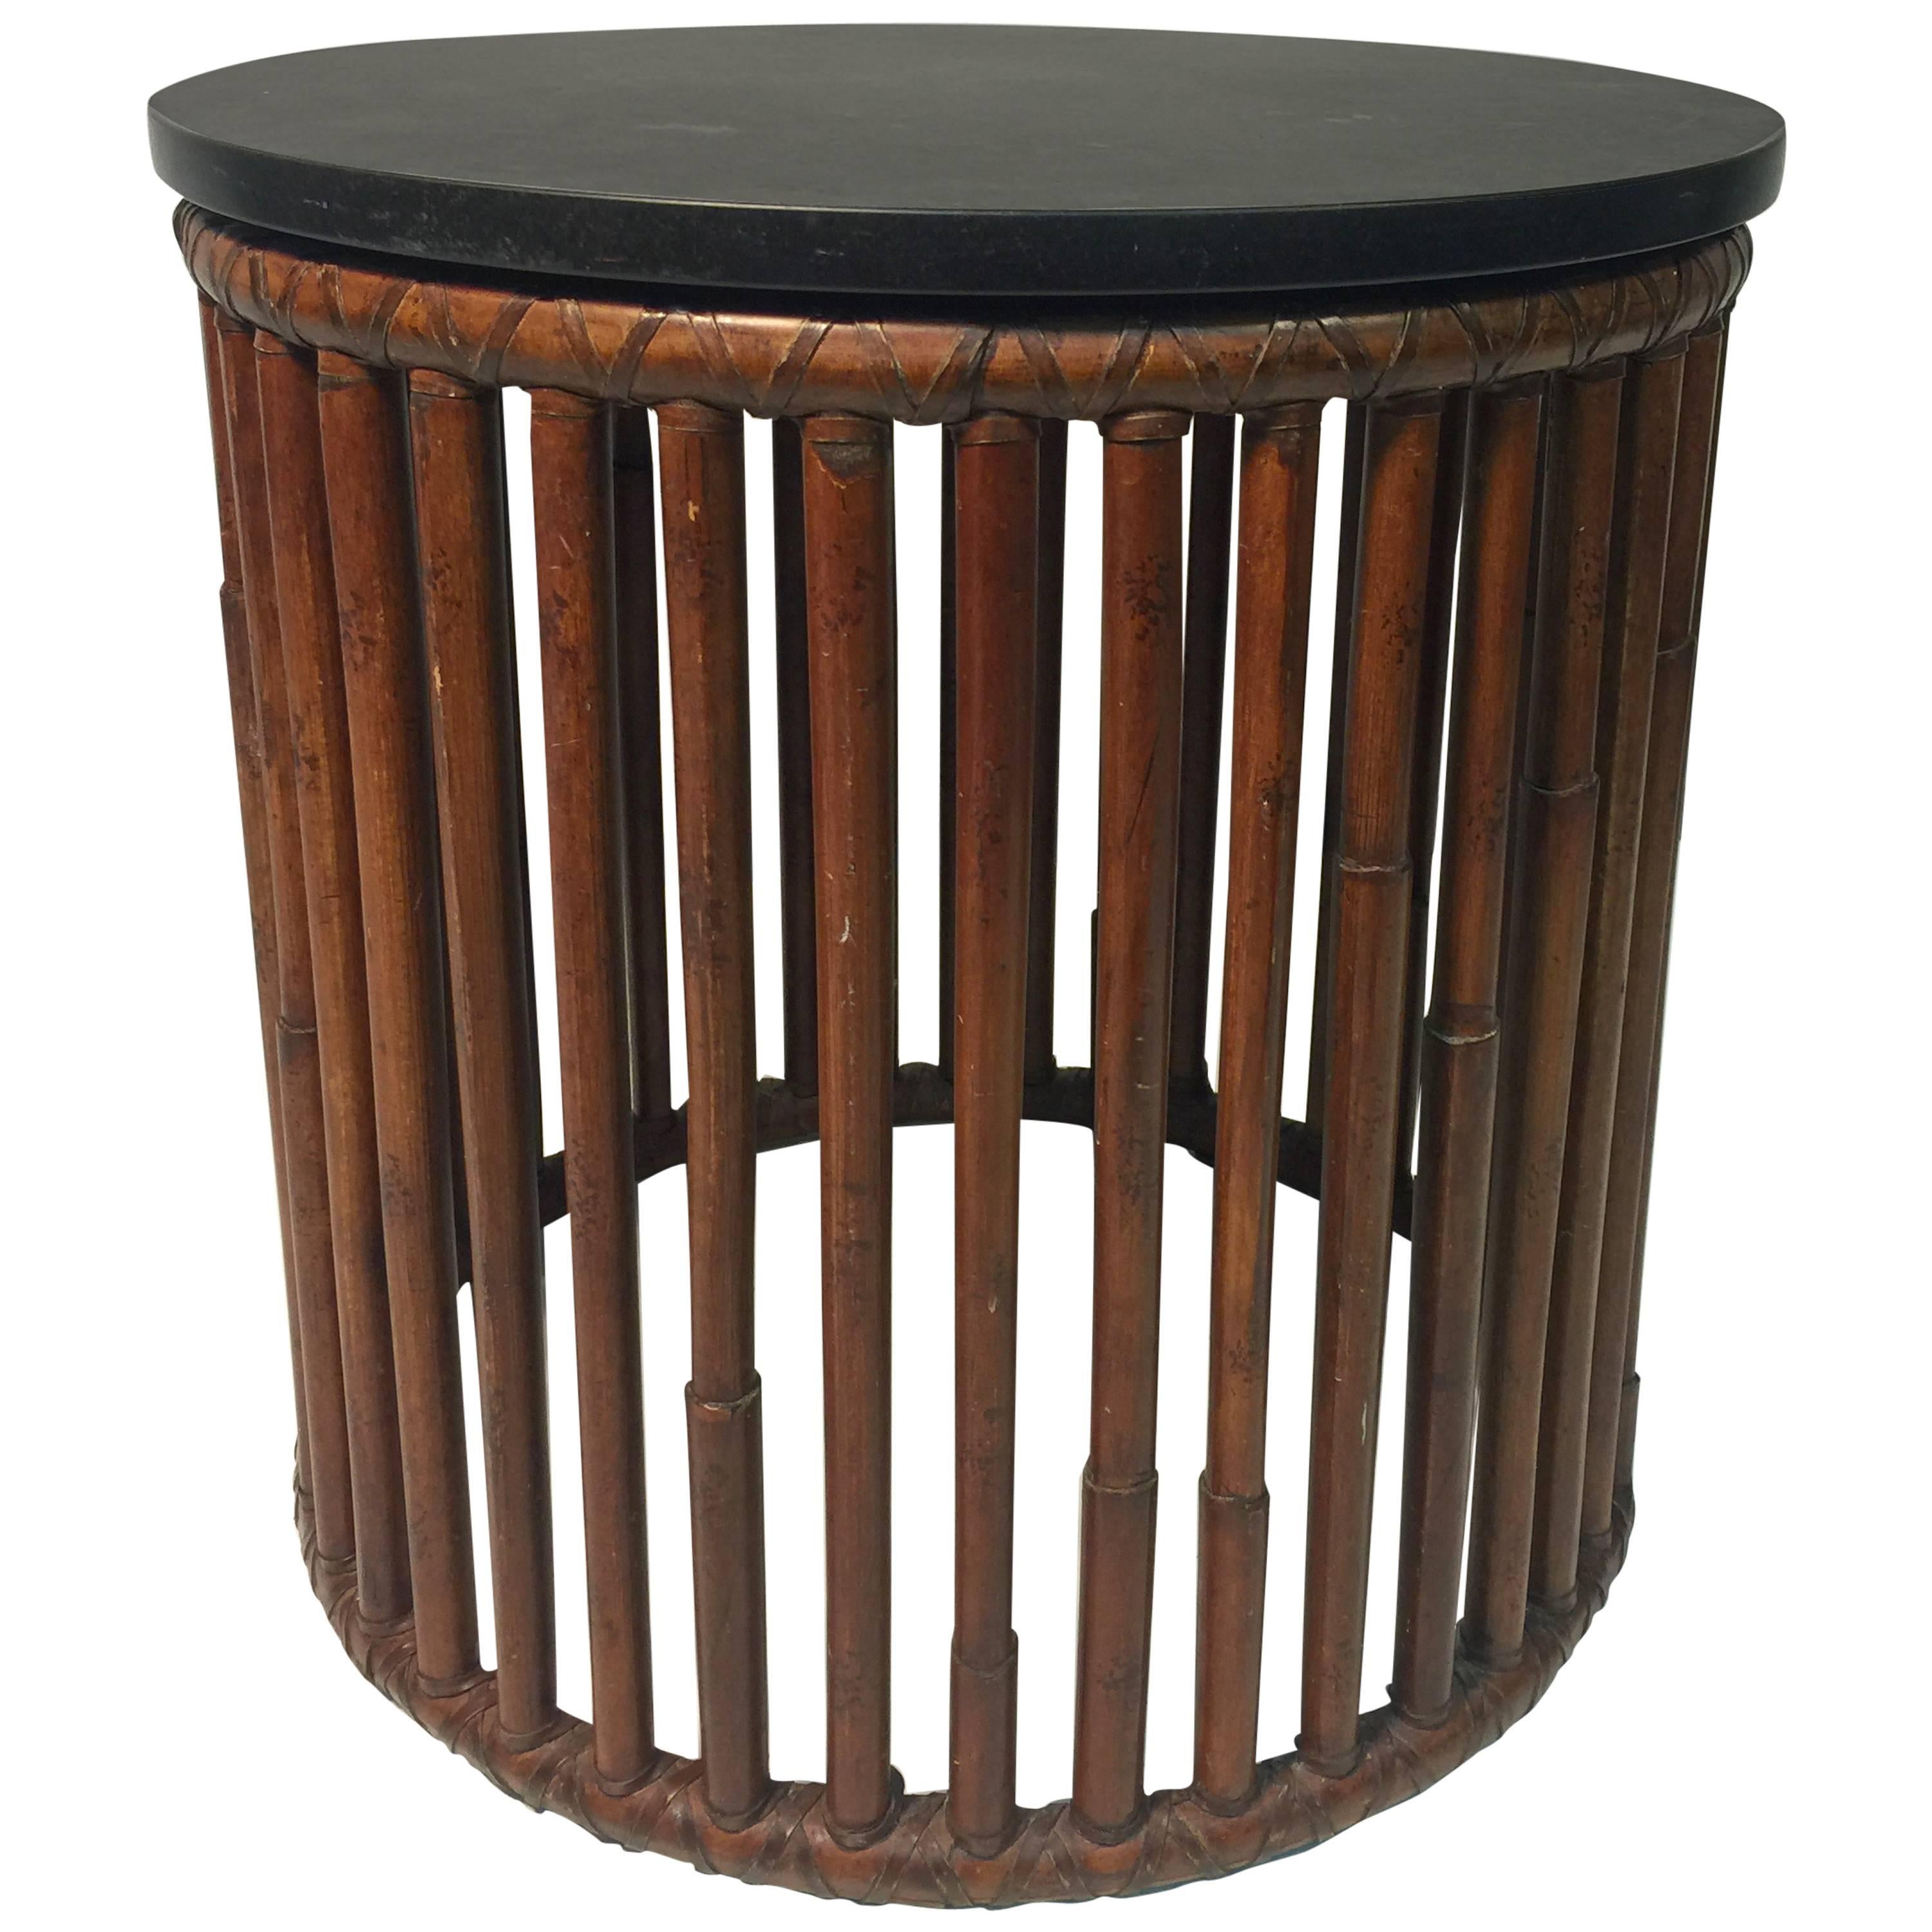 Beautiful Bamboo Drum Table with Granite Top by McGuire For Sale